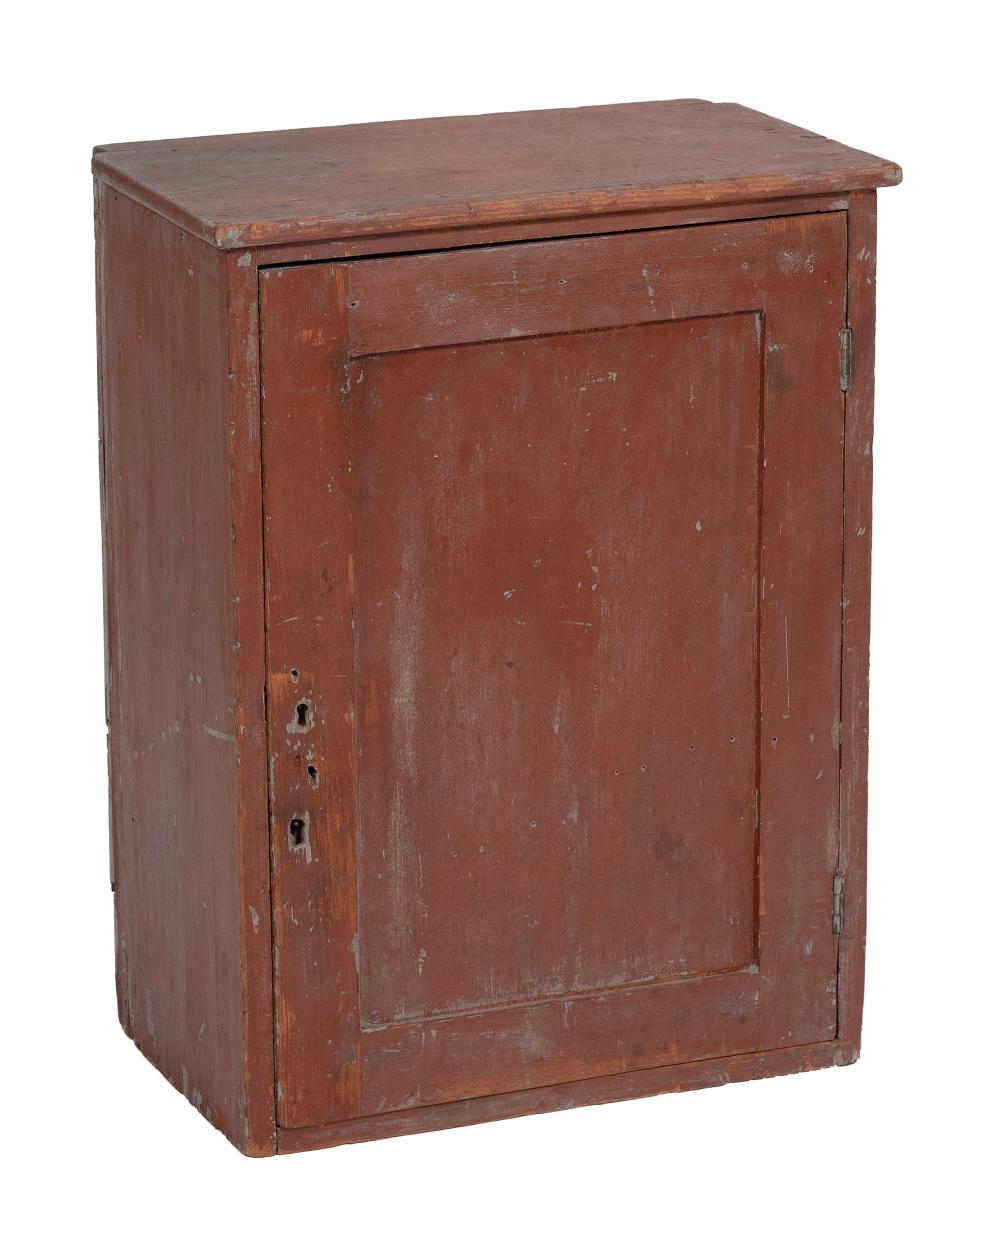 HANGING STORAGE CABINET 19TH CENTURY 34e79a